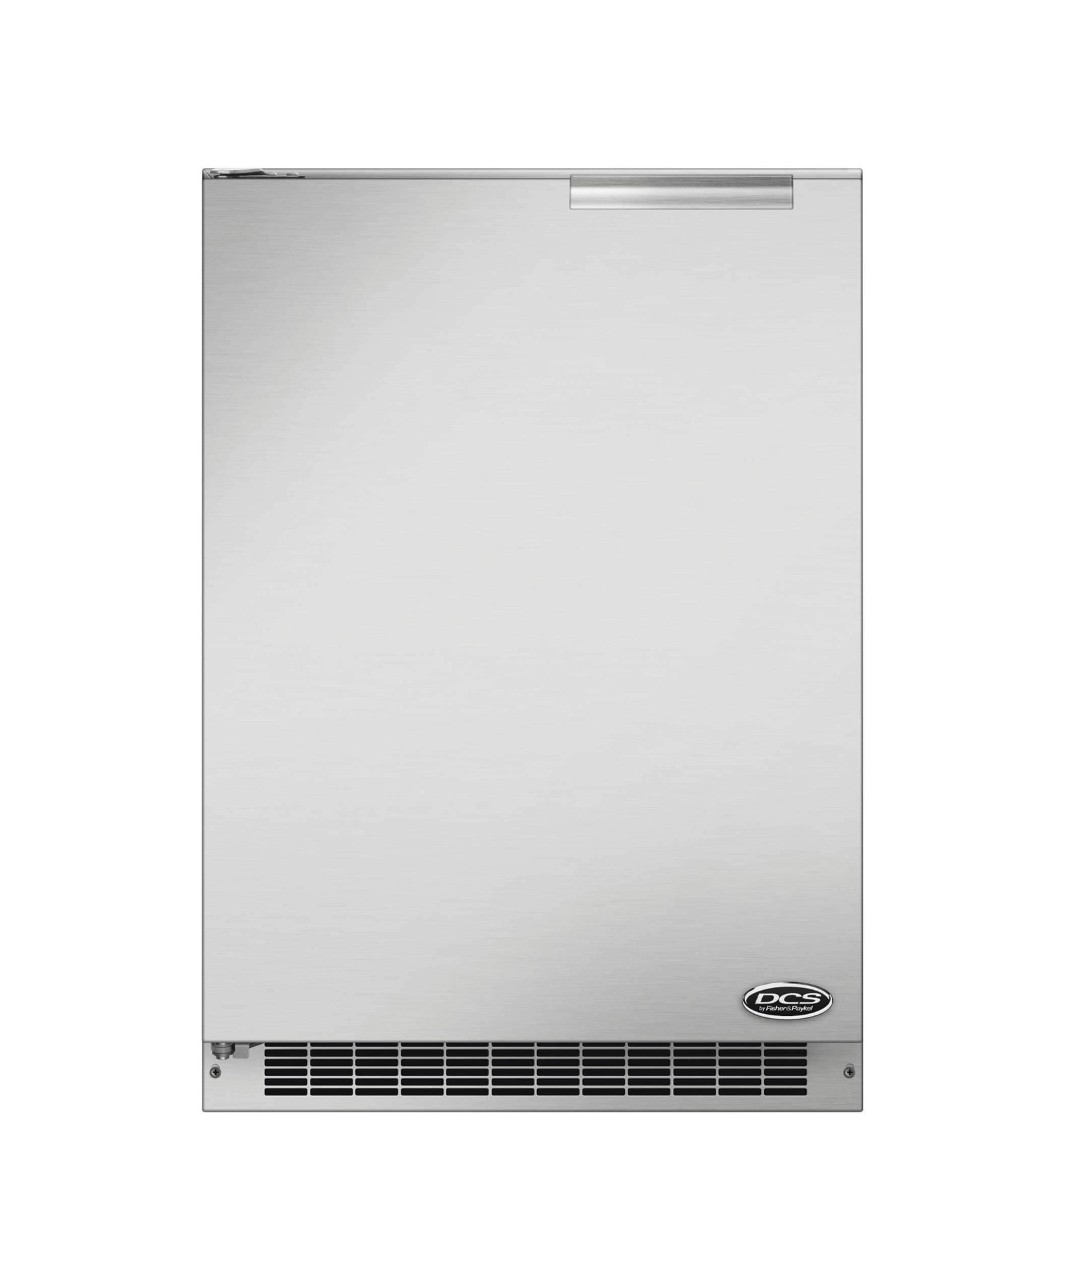 Stainless steel refrigerator by FISHER & PAYKEL GRILLS DCS